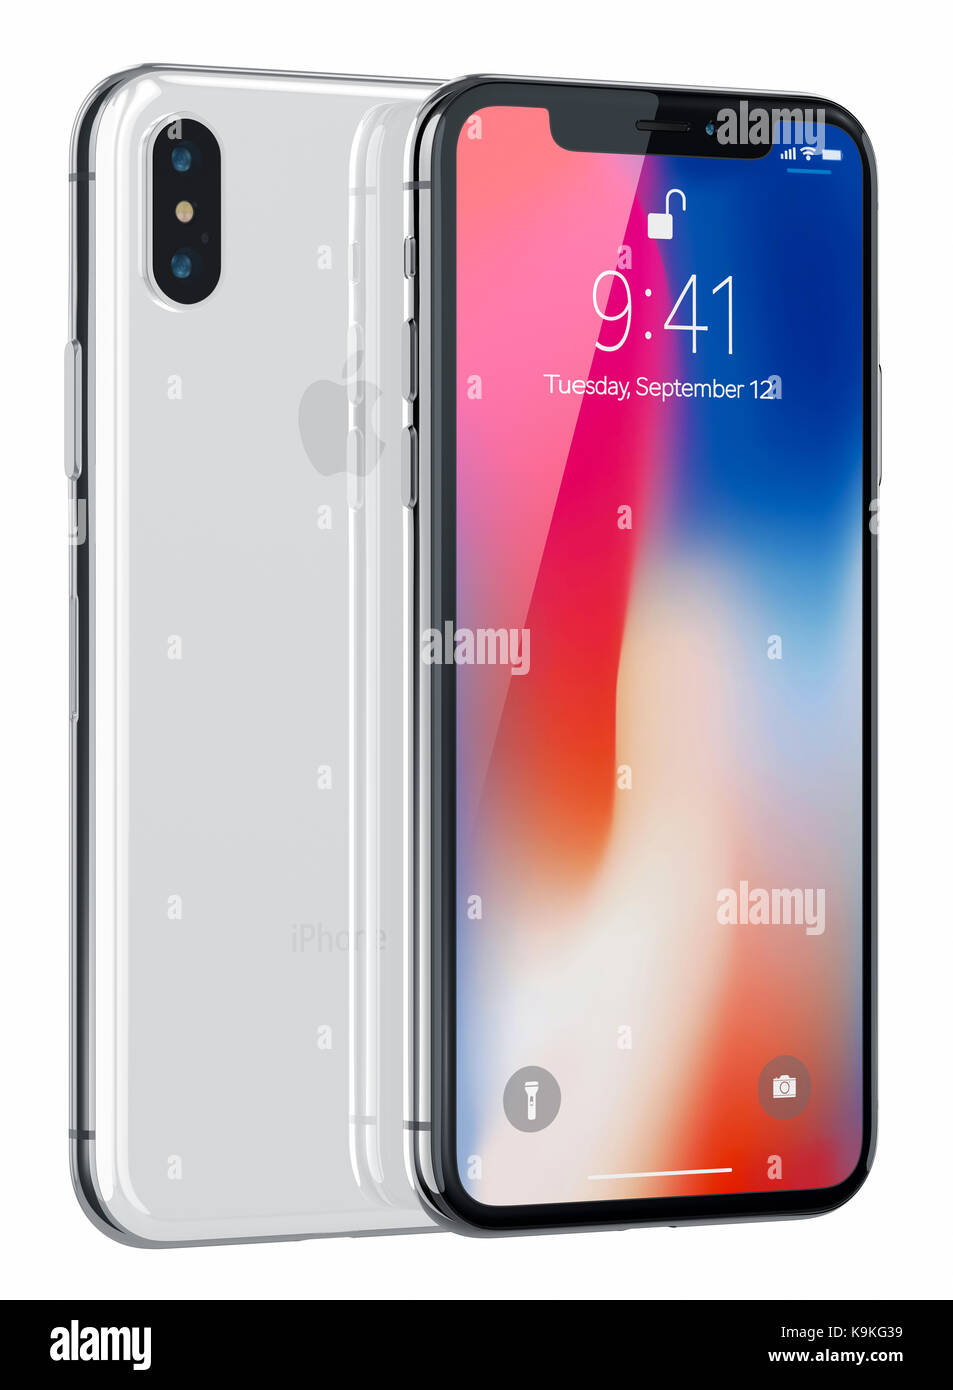 Galati, Romania - September 20, 2017: 3D Render of a two New iPhone X (Ten) Illustrative Editorial Image, on white background. With iPhone X, the devi Stock Photo